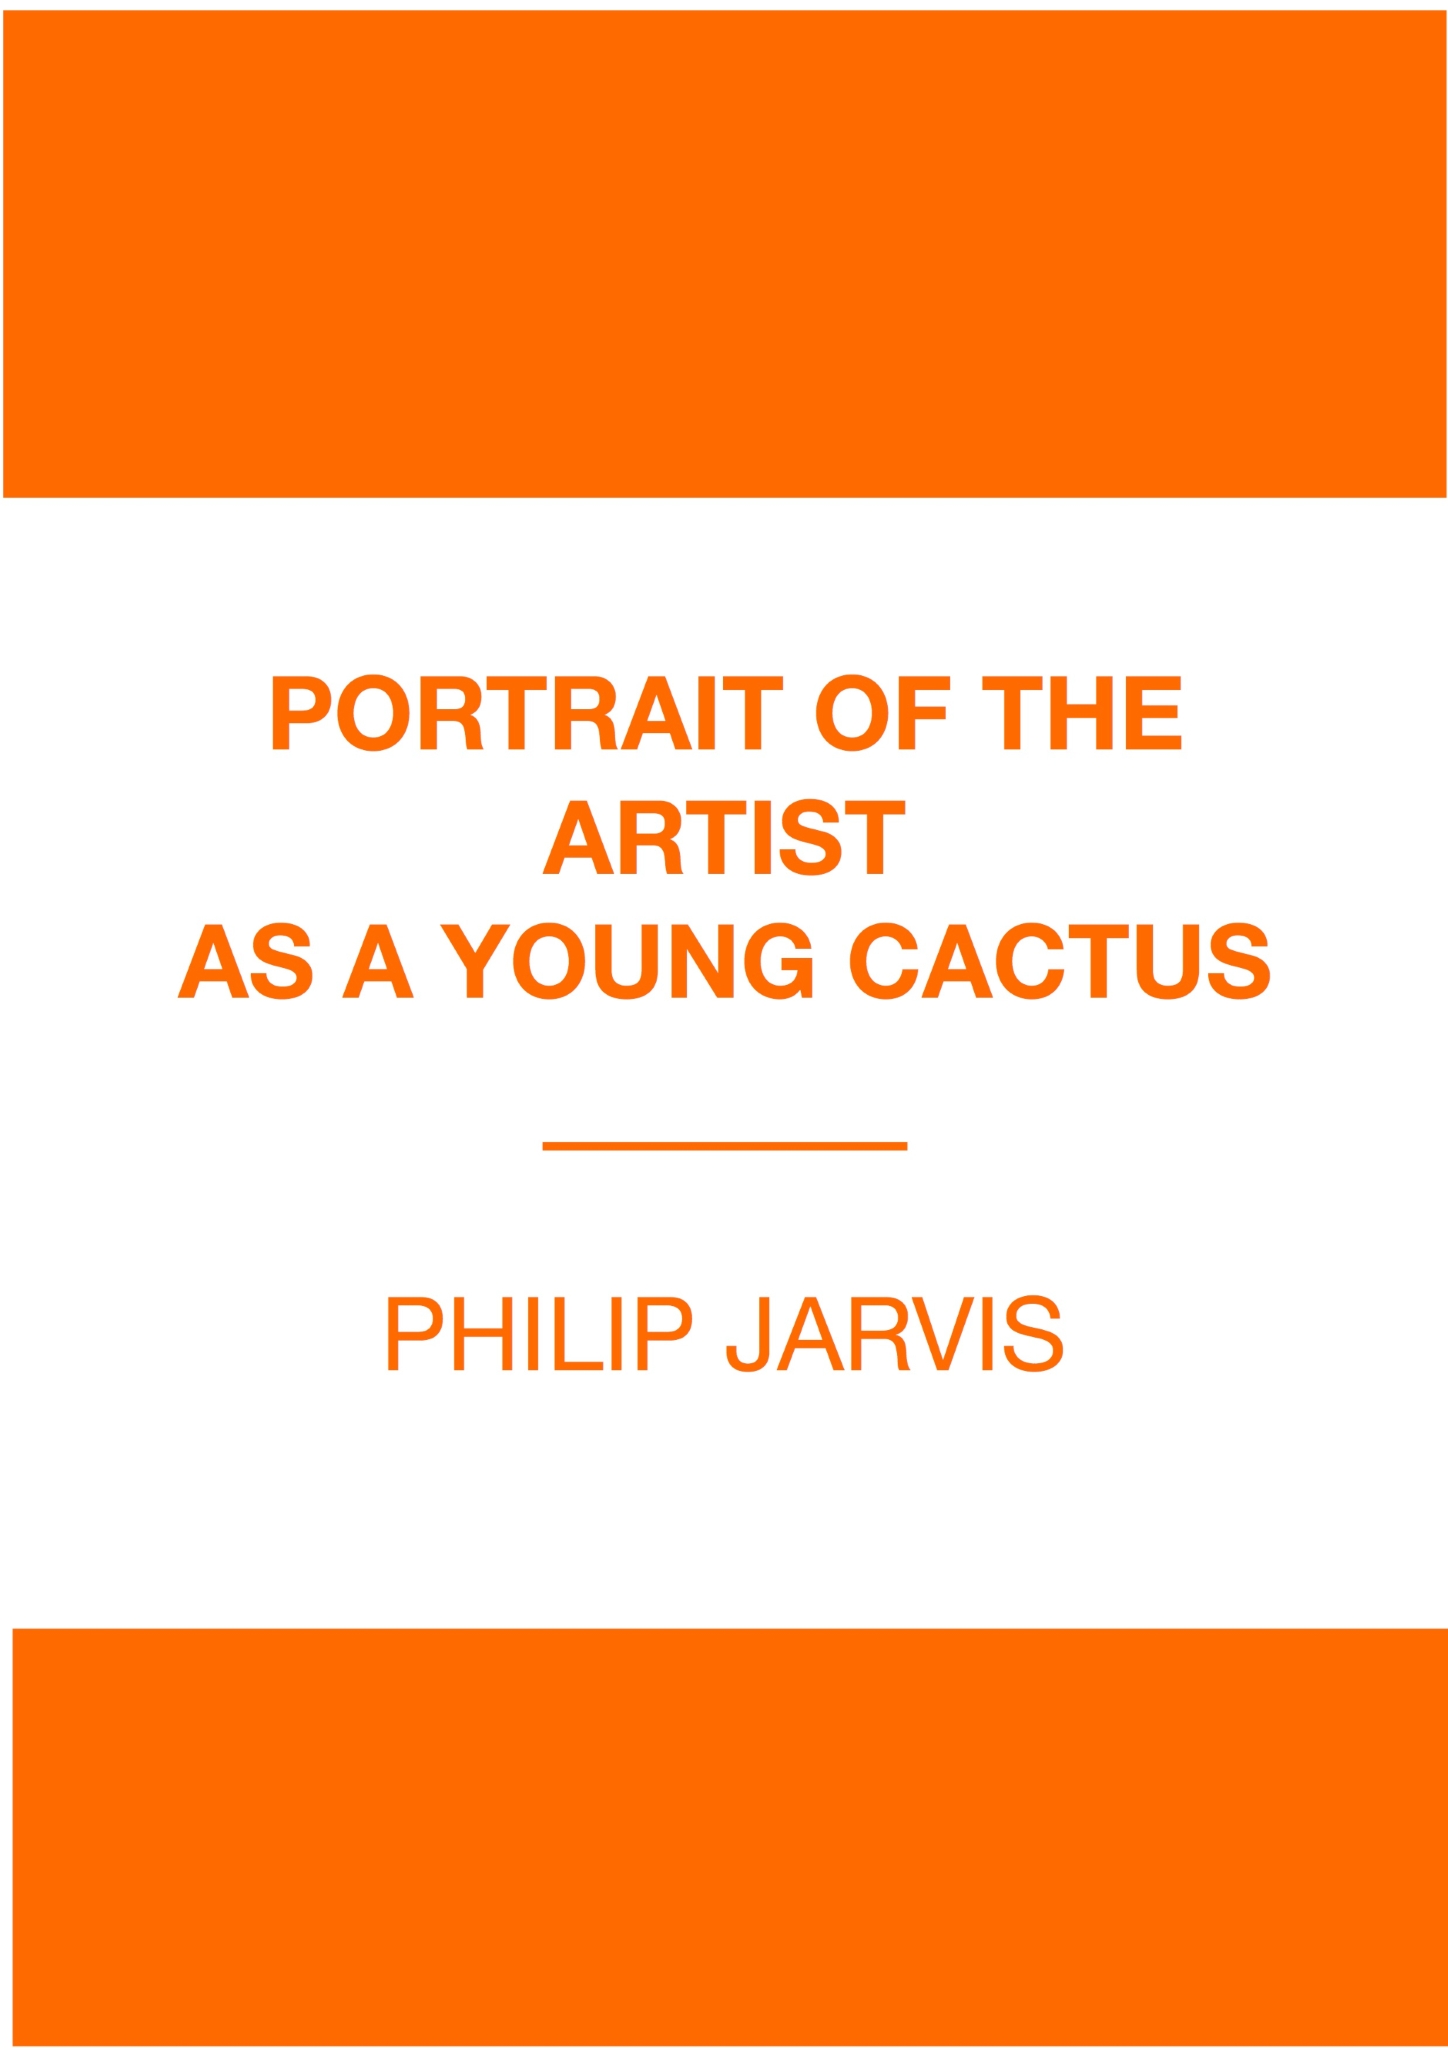 portrait-of-the-artist-as-a-young-cactus